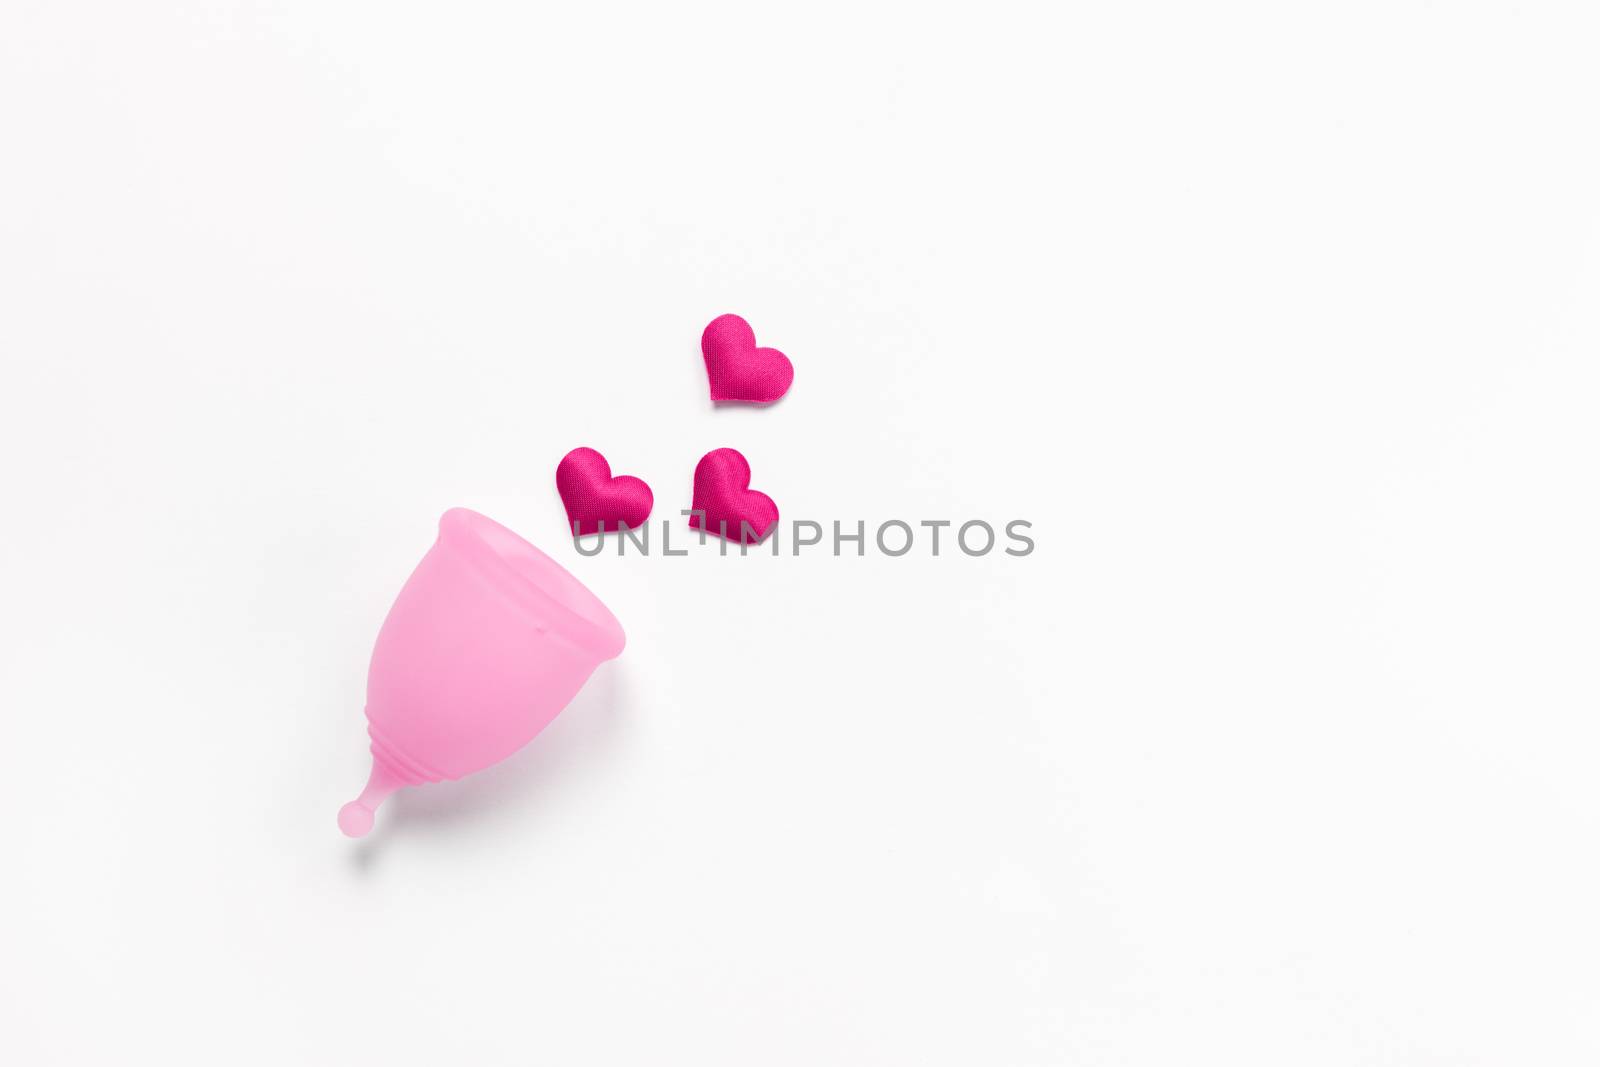 Pink menstrual cup on white background with crimson hearts. Concept zero waste, savings, minimalism, these days. Feminine hygiene product, flat lay, copy space. Horizontal.